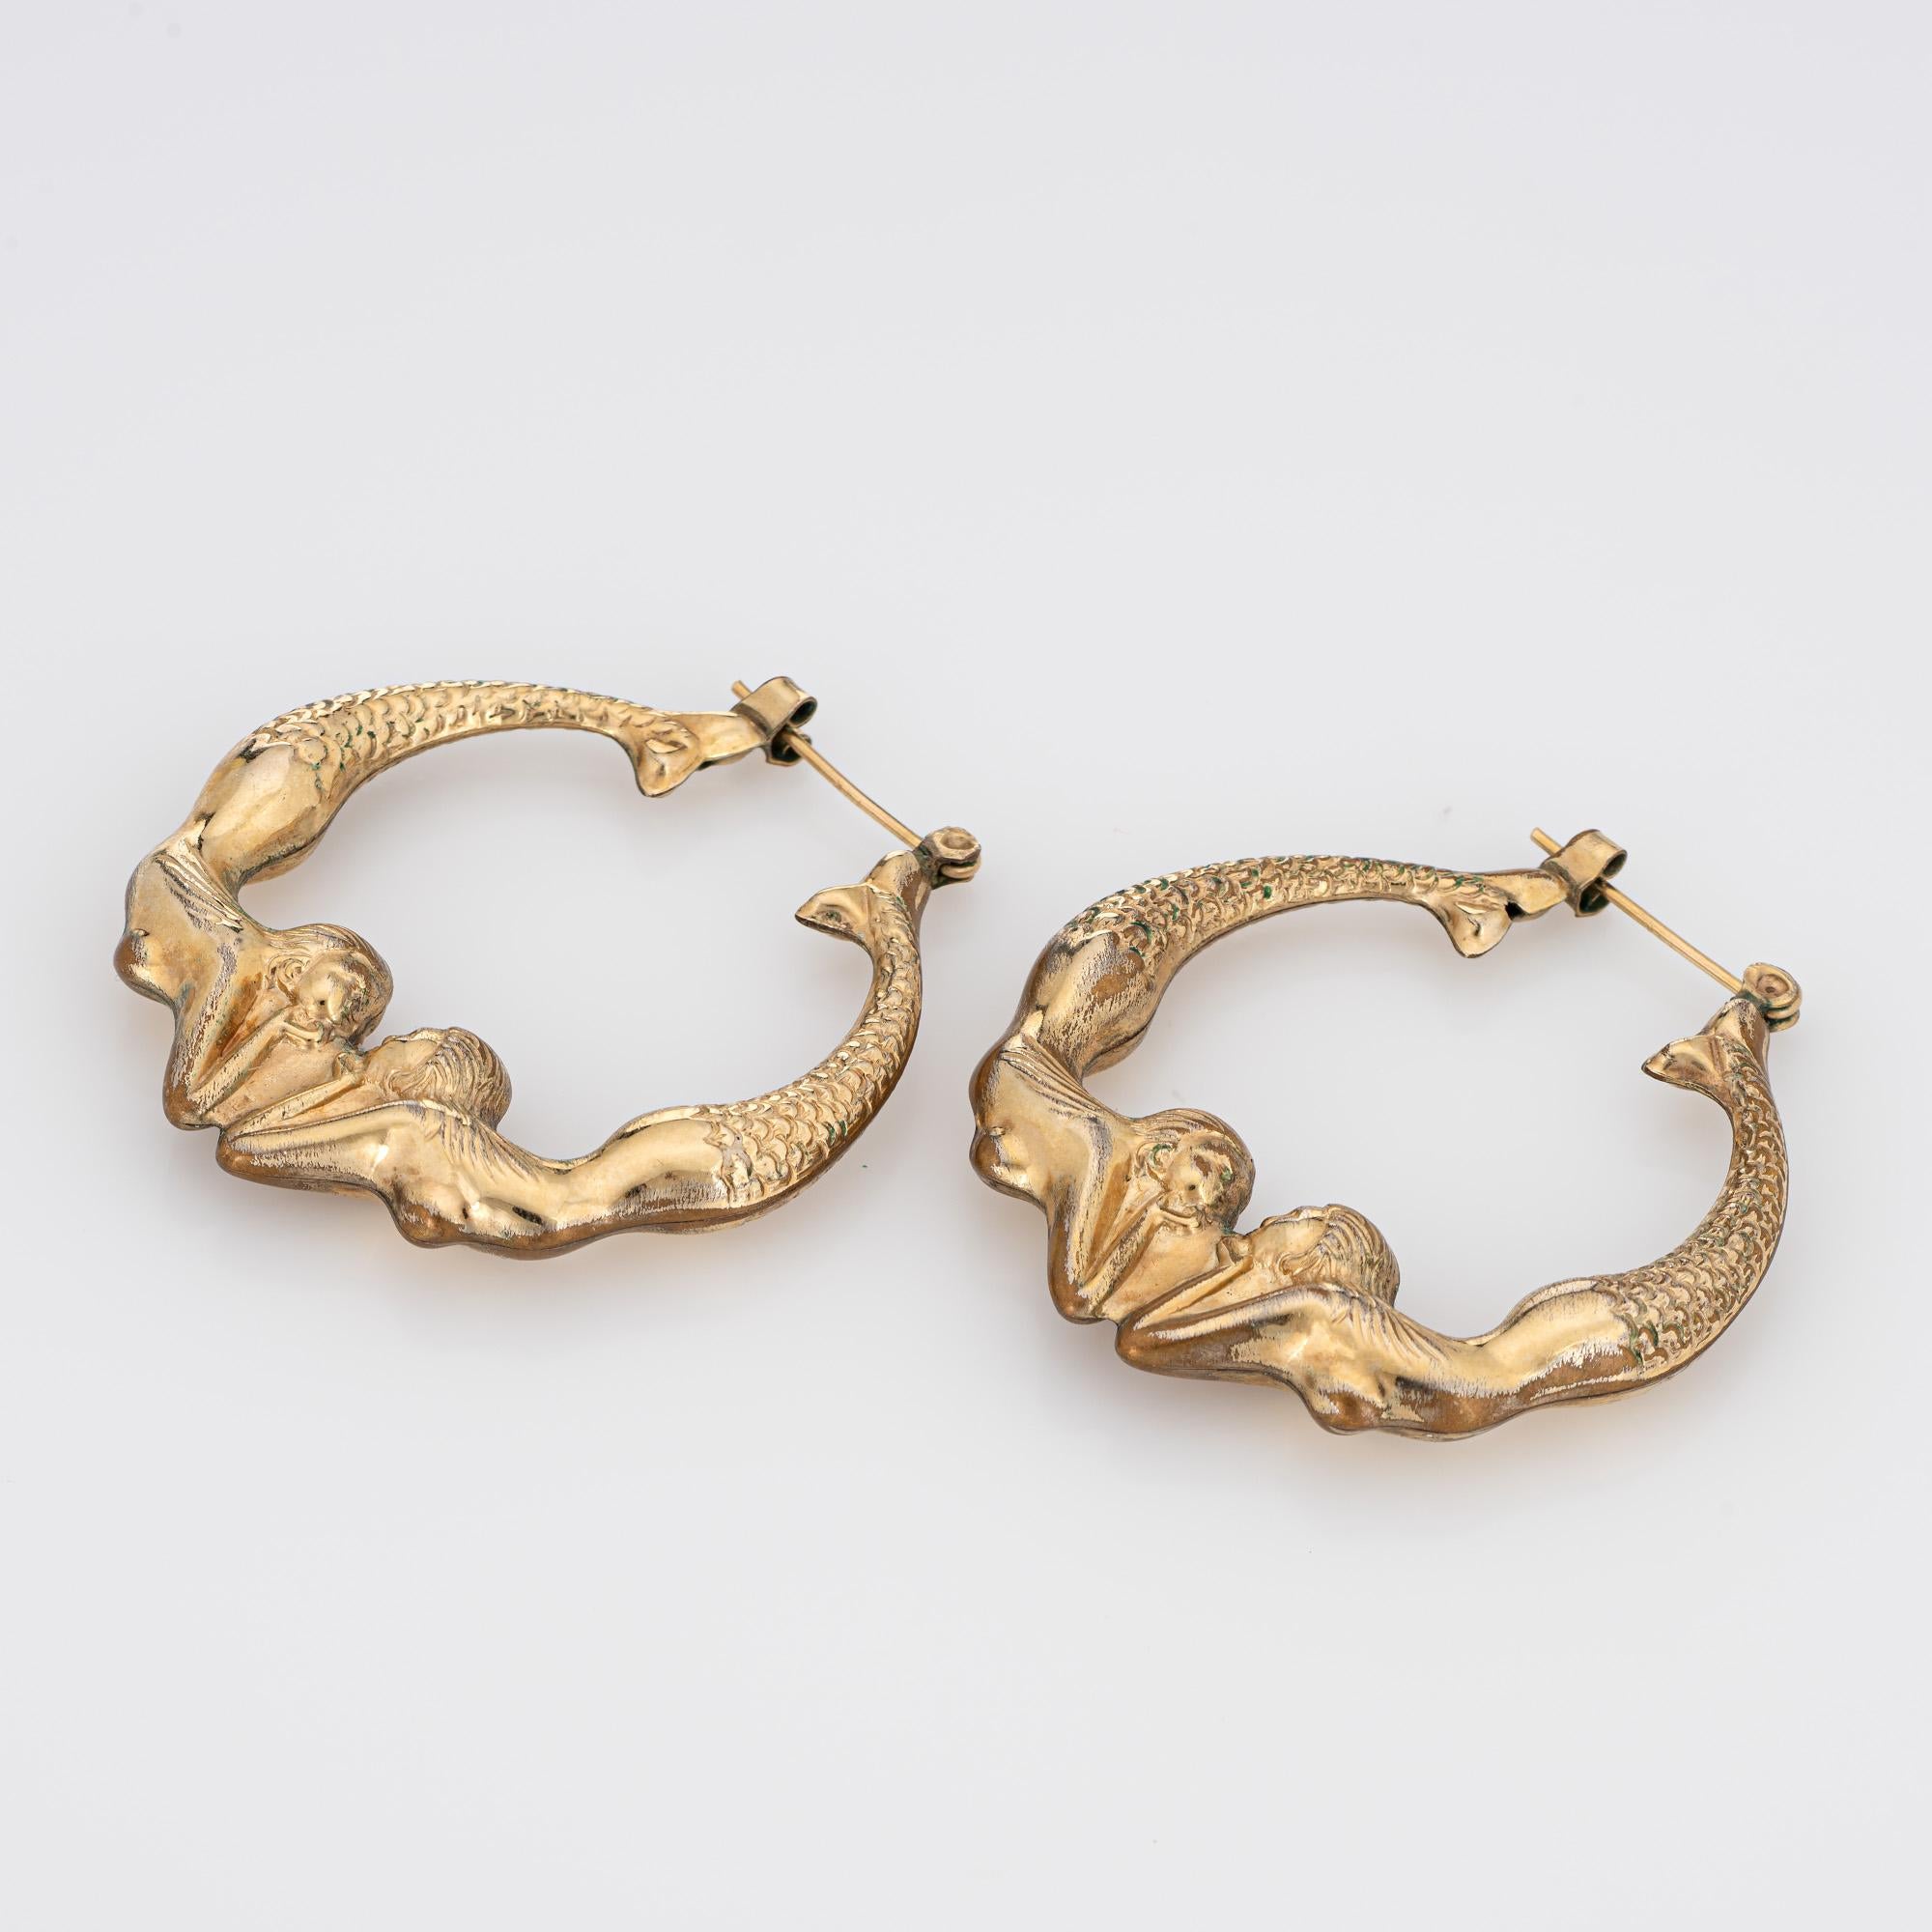 Finely detailed pair of vintage double mermaid earrings crafted in 14k yellow gold (circa 1980s).

The stylish earrings feature two mermaids joined together at the base of the earrings, with textured scale like detailing to the tail, flowing hair